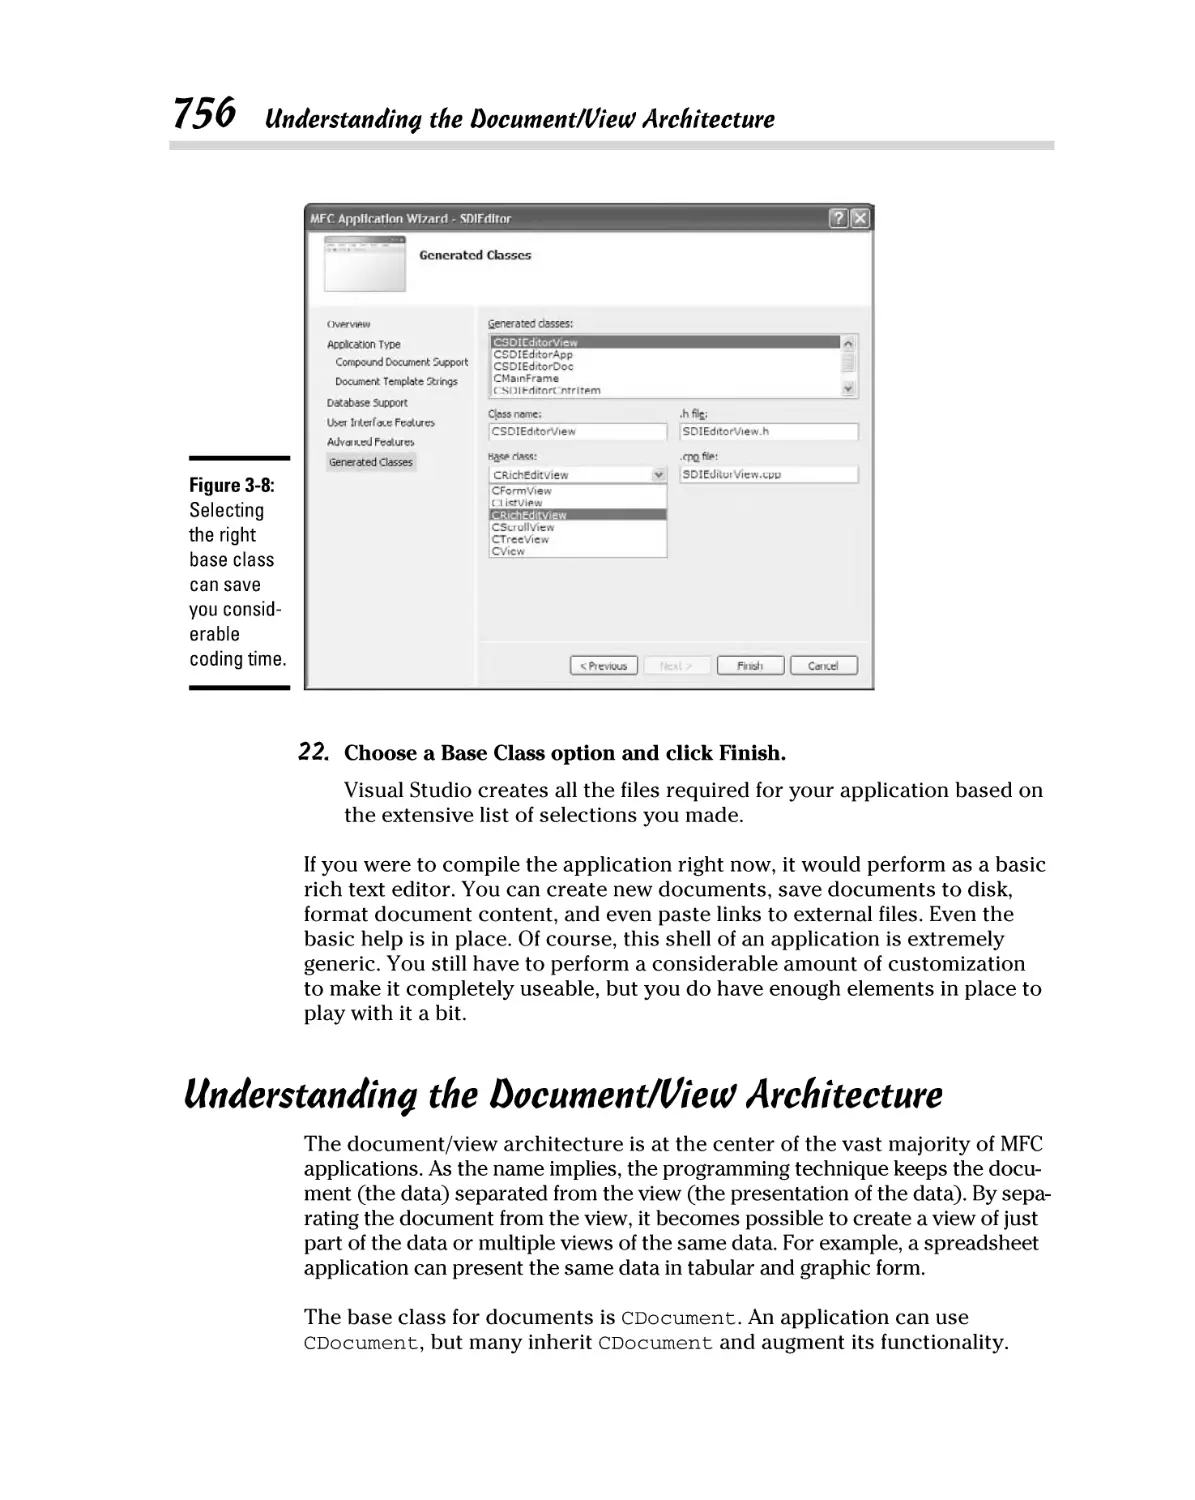 Understanding the Document/View Architecture